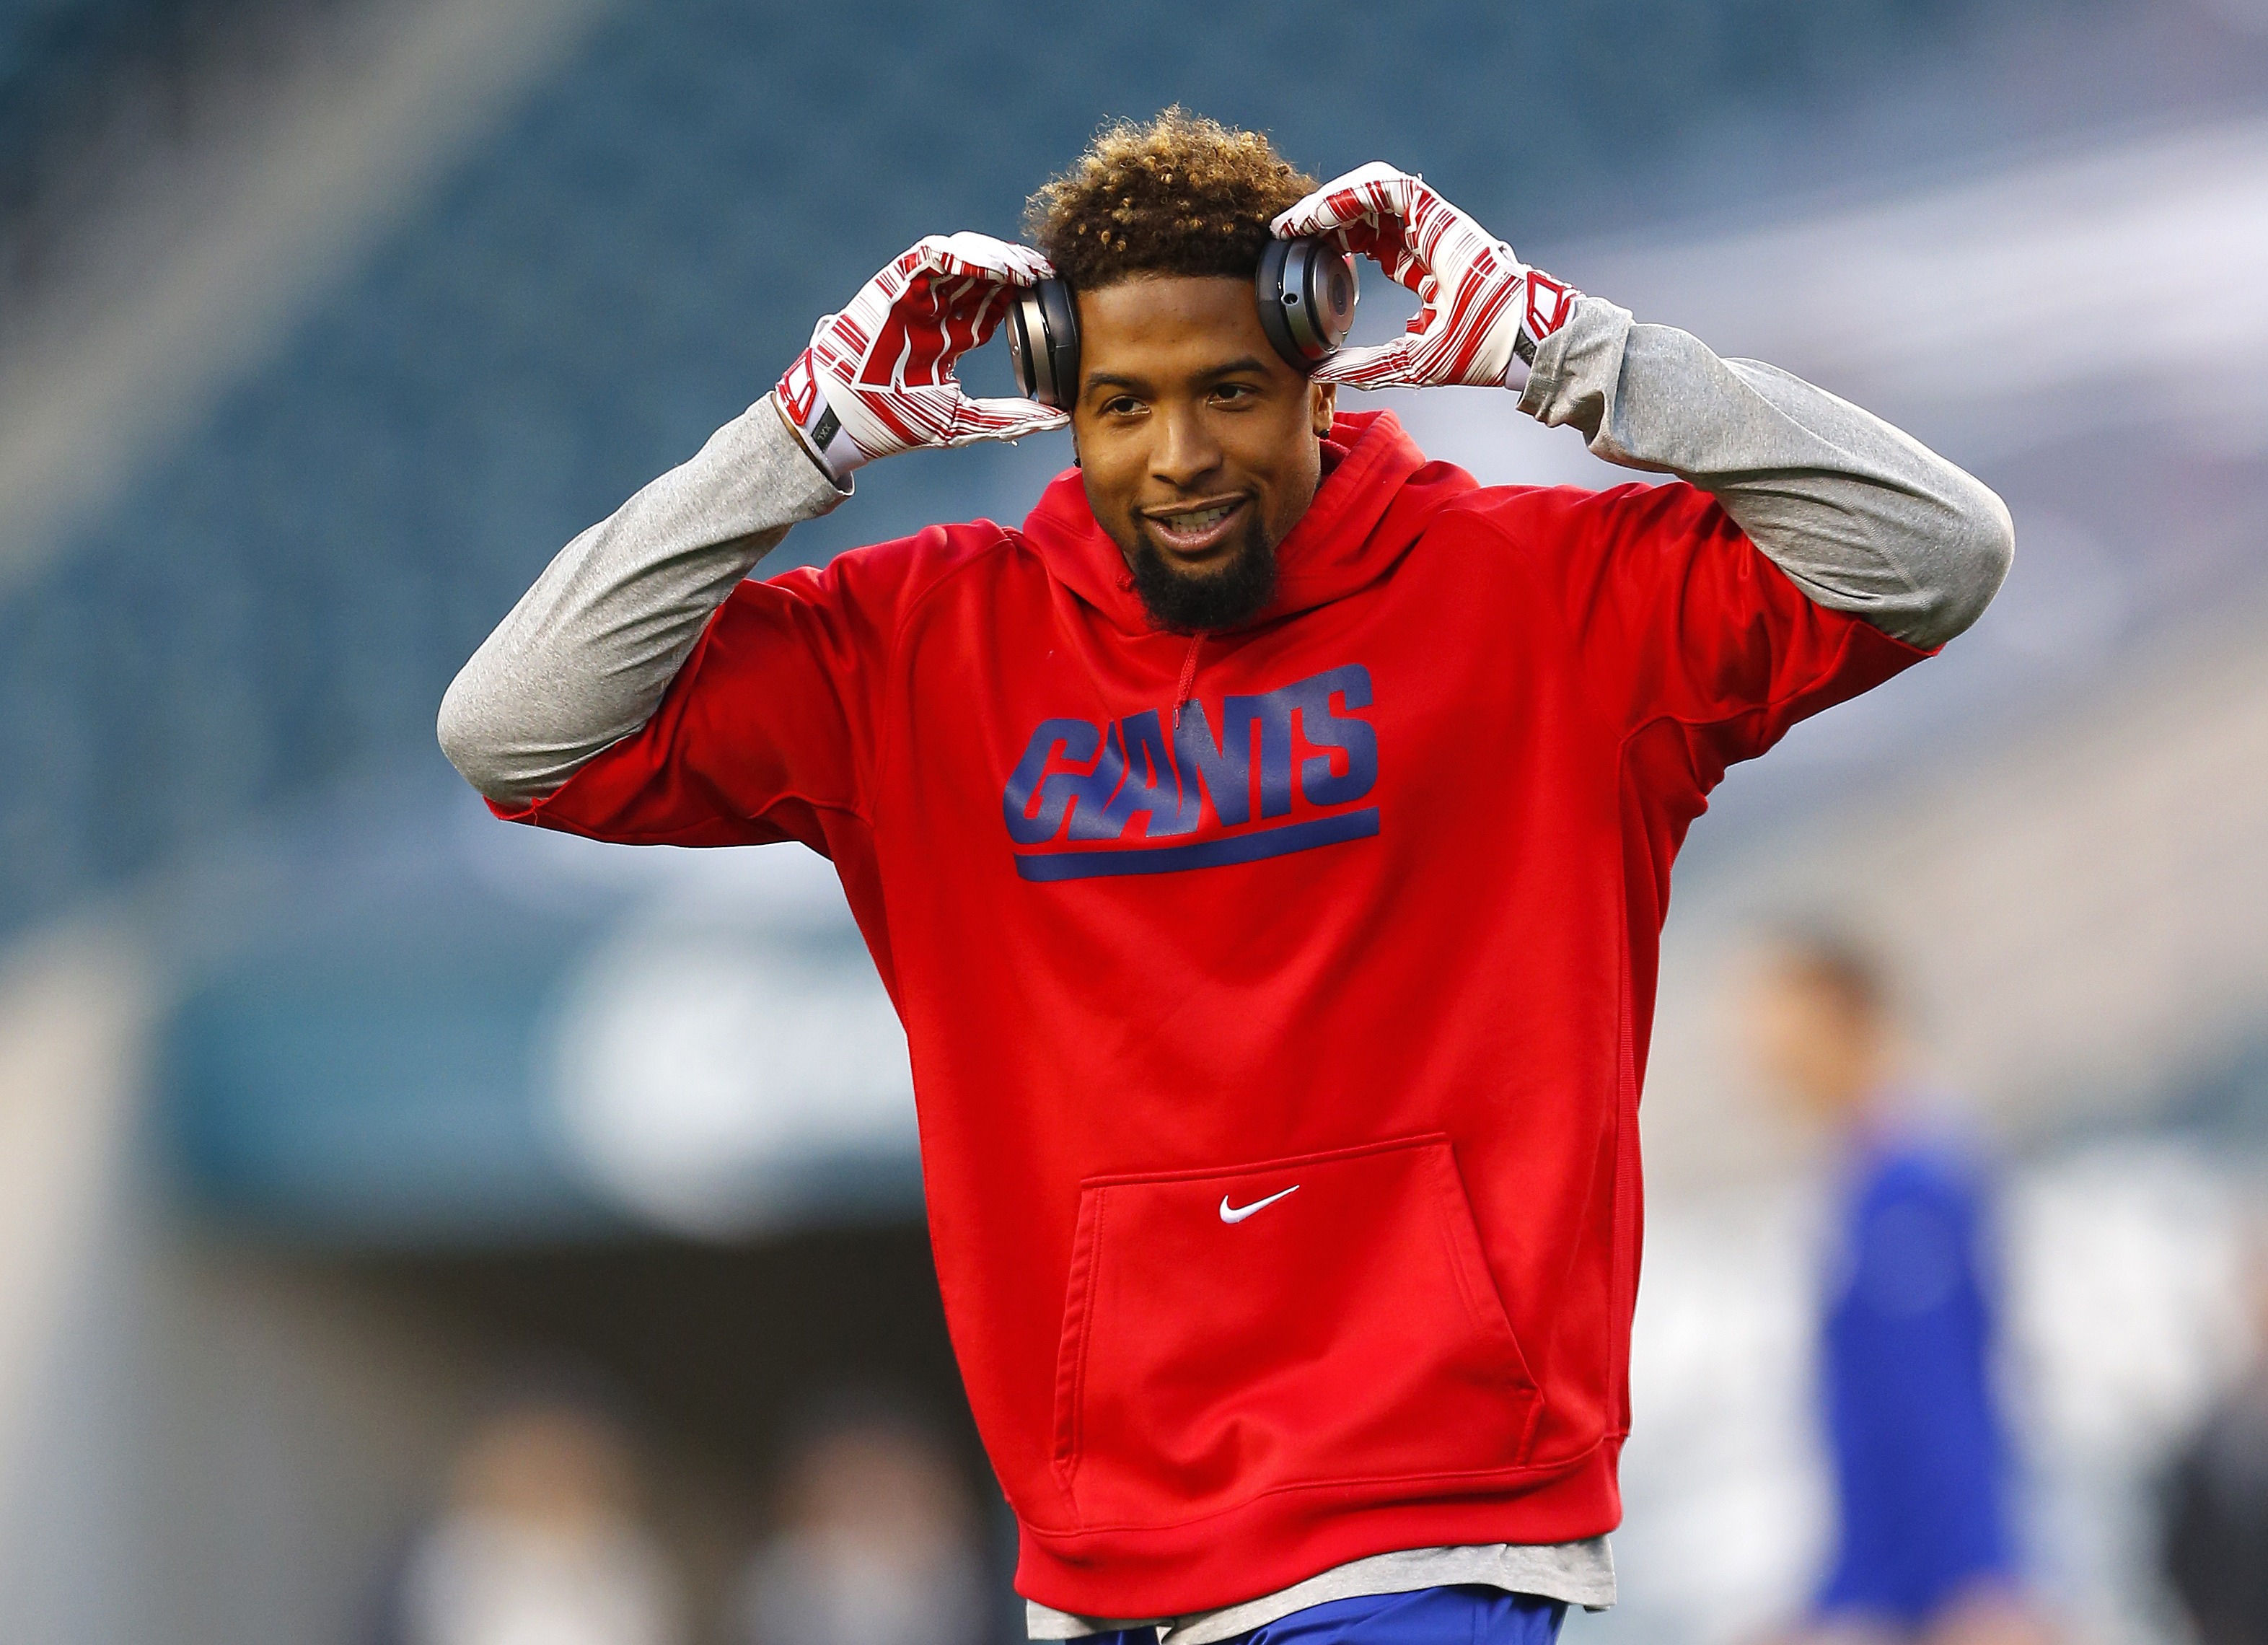 PHILADELPHIA, PA - OCTOBER 12: Odell Beckham Jr. #13 of the New York Giants warms up before a game against the Philadelphia Eagles at Lincoln Financial Field on October 12, 2014 in Philadelphia, Pennsylvania. (Photo by Rich Schultz /Getty Images)